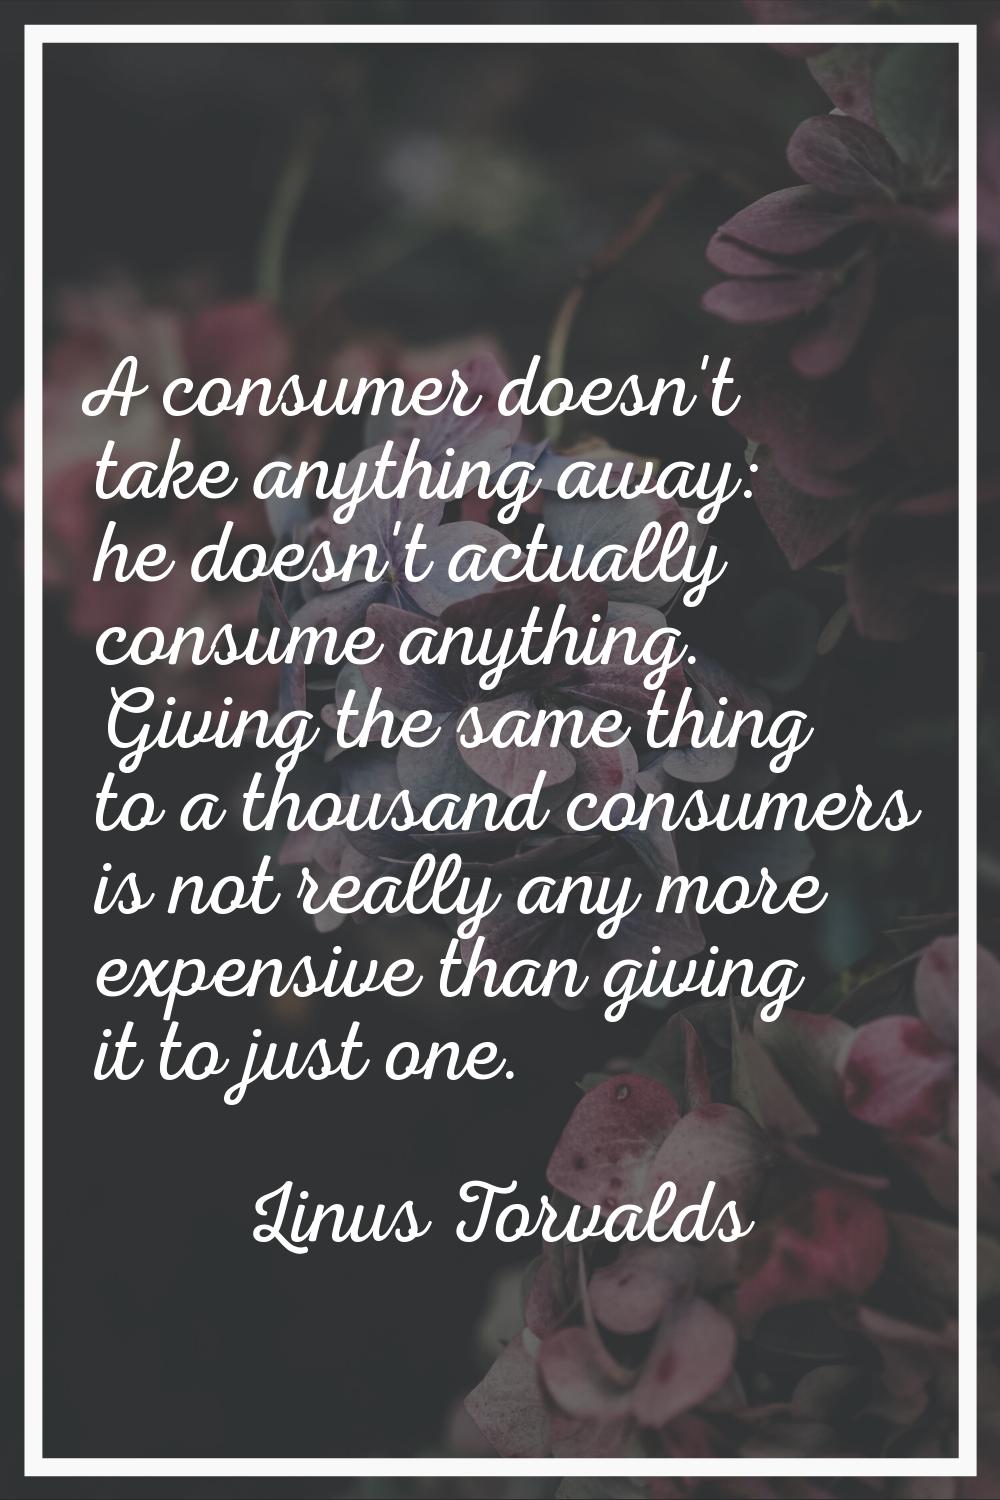 A consumer doesn't take anything away: he doesn't actually consume anything. Giving the same thing 